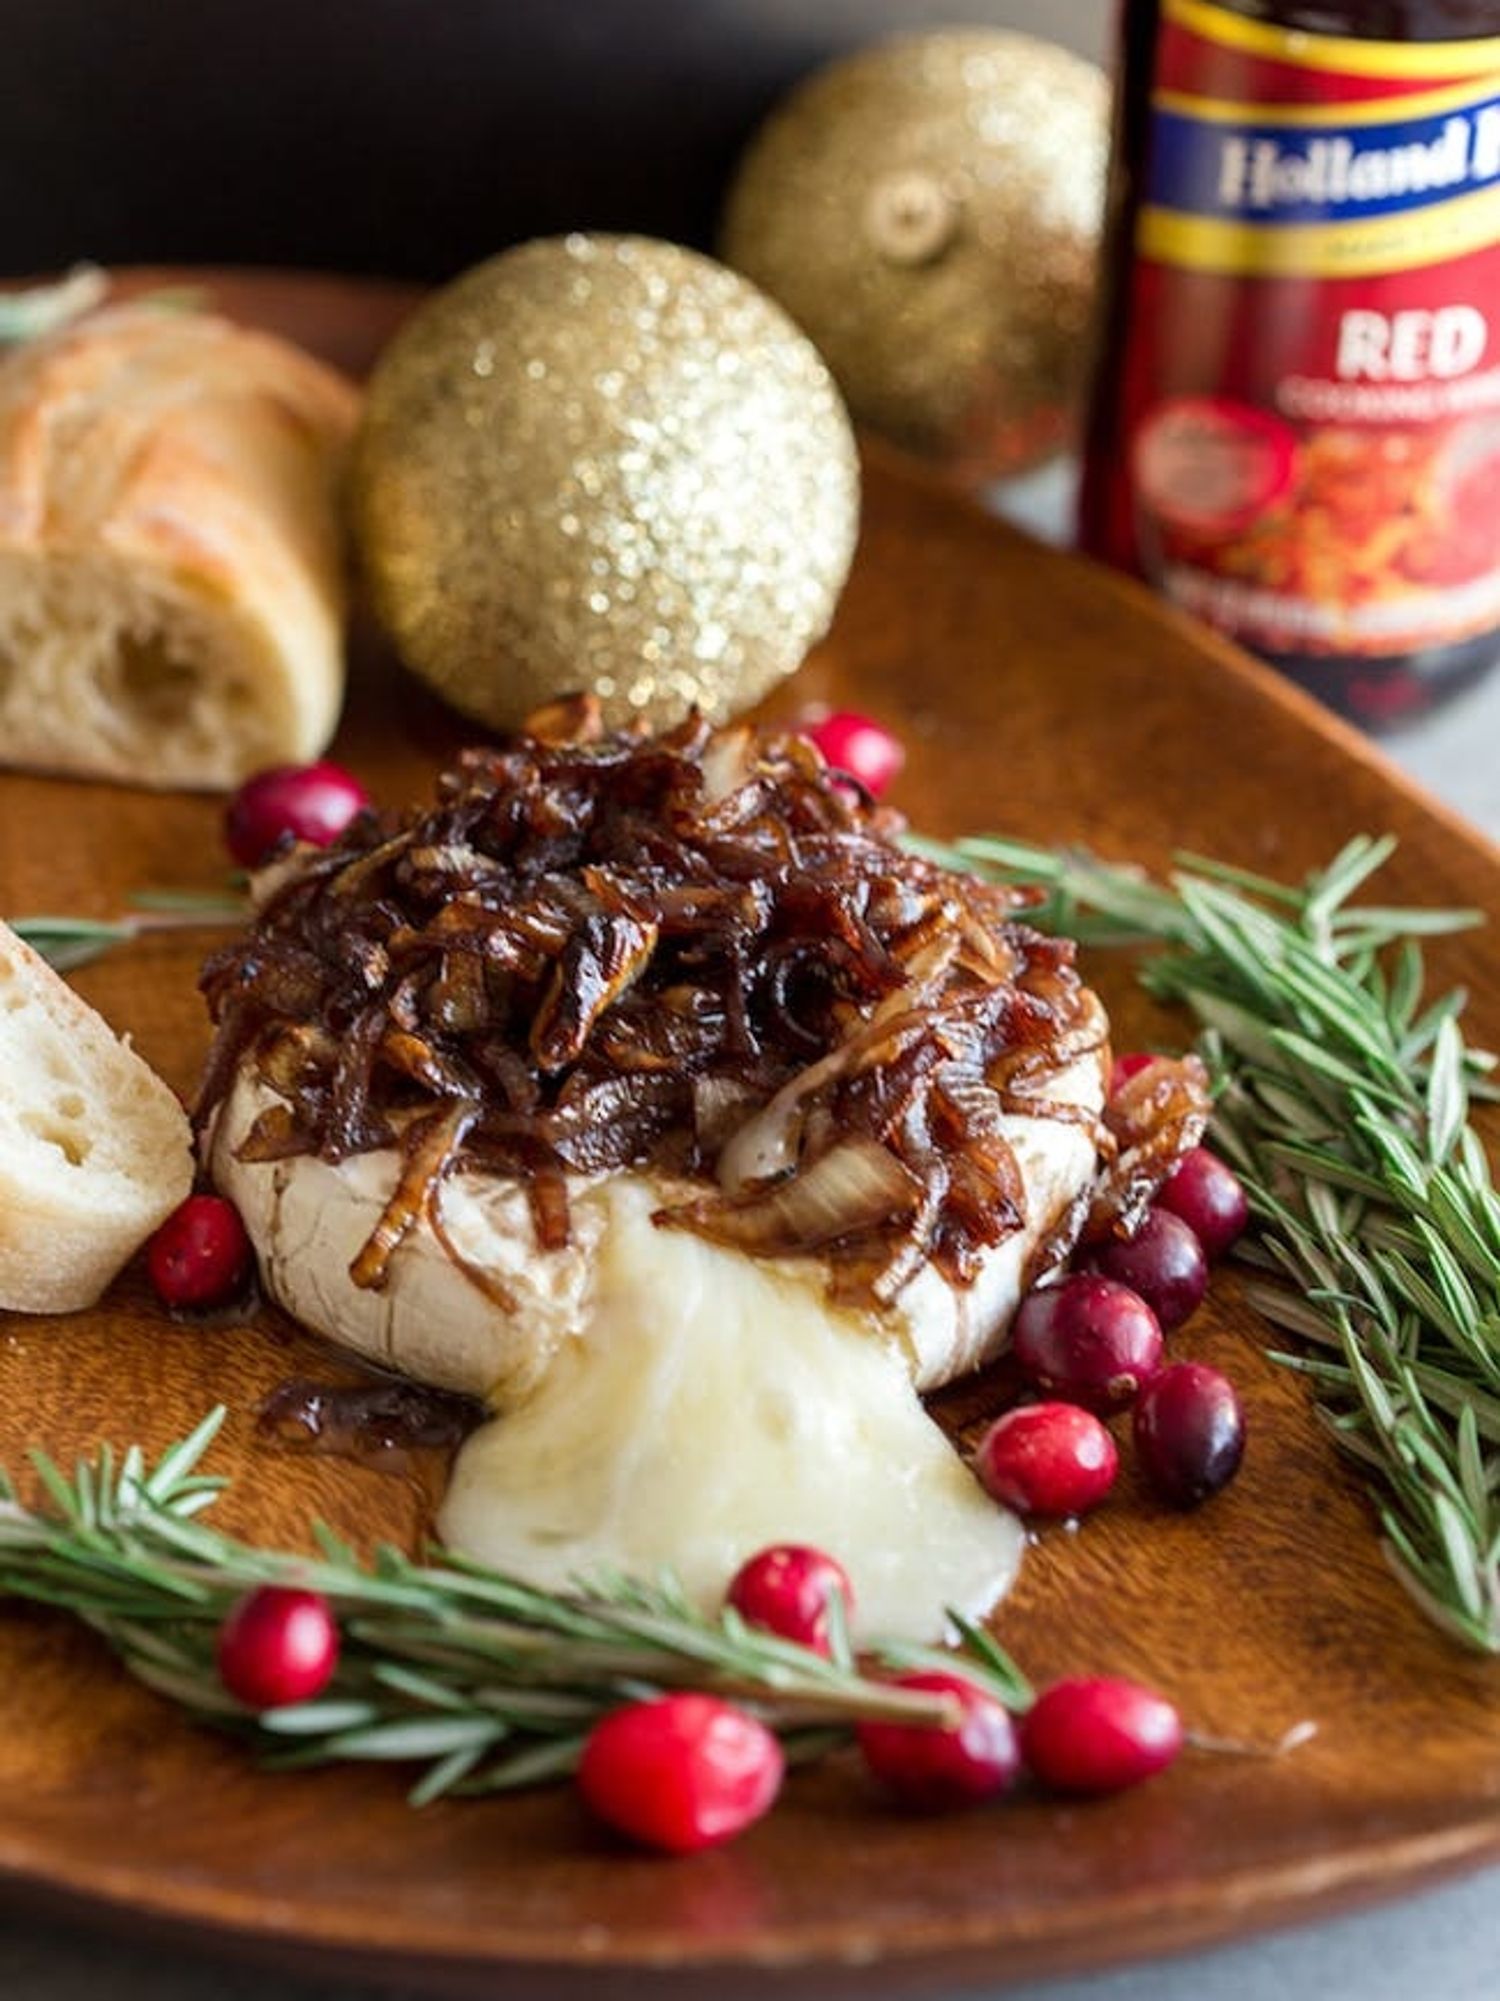 Red Cooking Wine Caramelized Onion Baked Brie decorated with some mistletoe